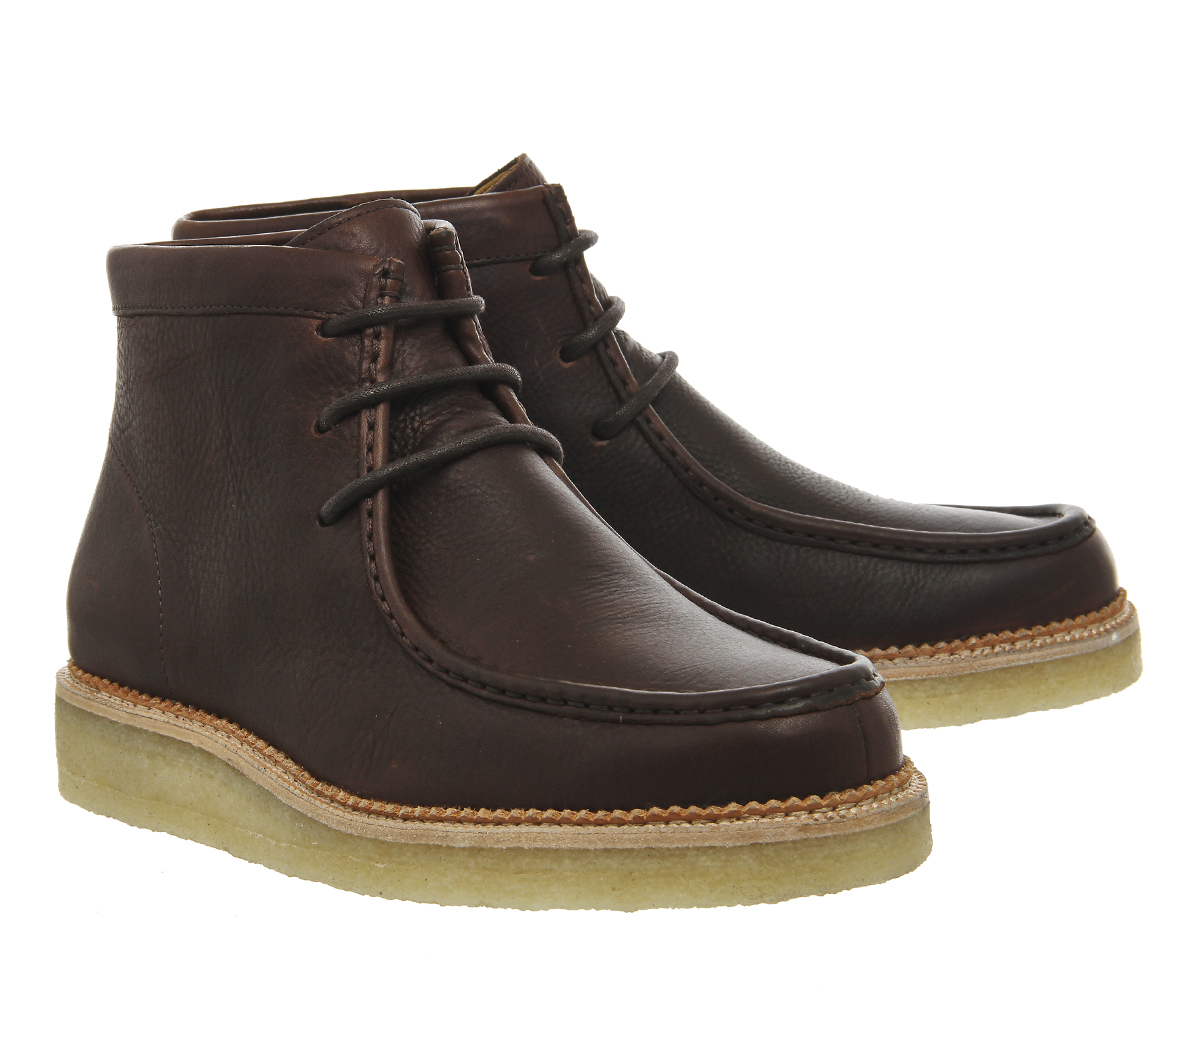 Clarks Leather Beckery Hike Boot in 